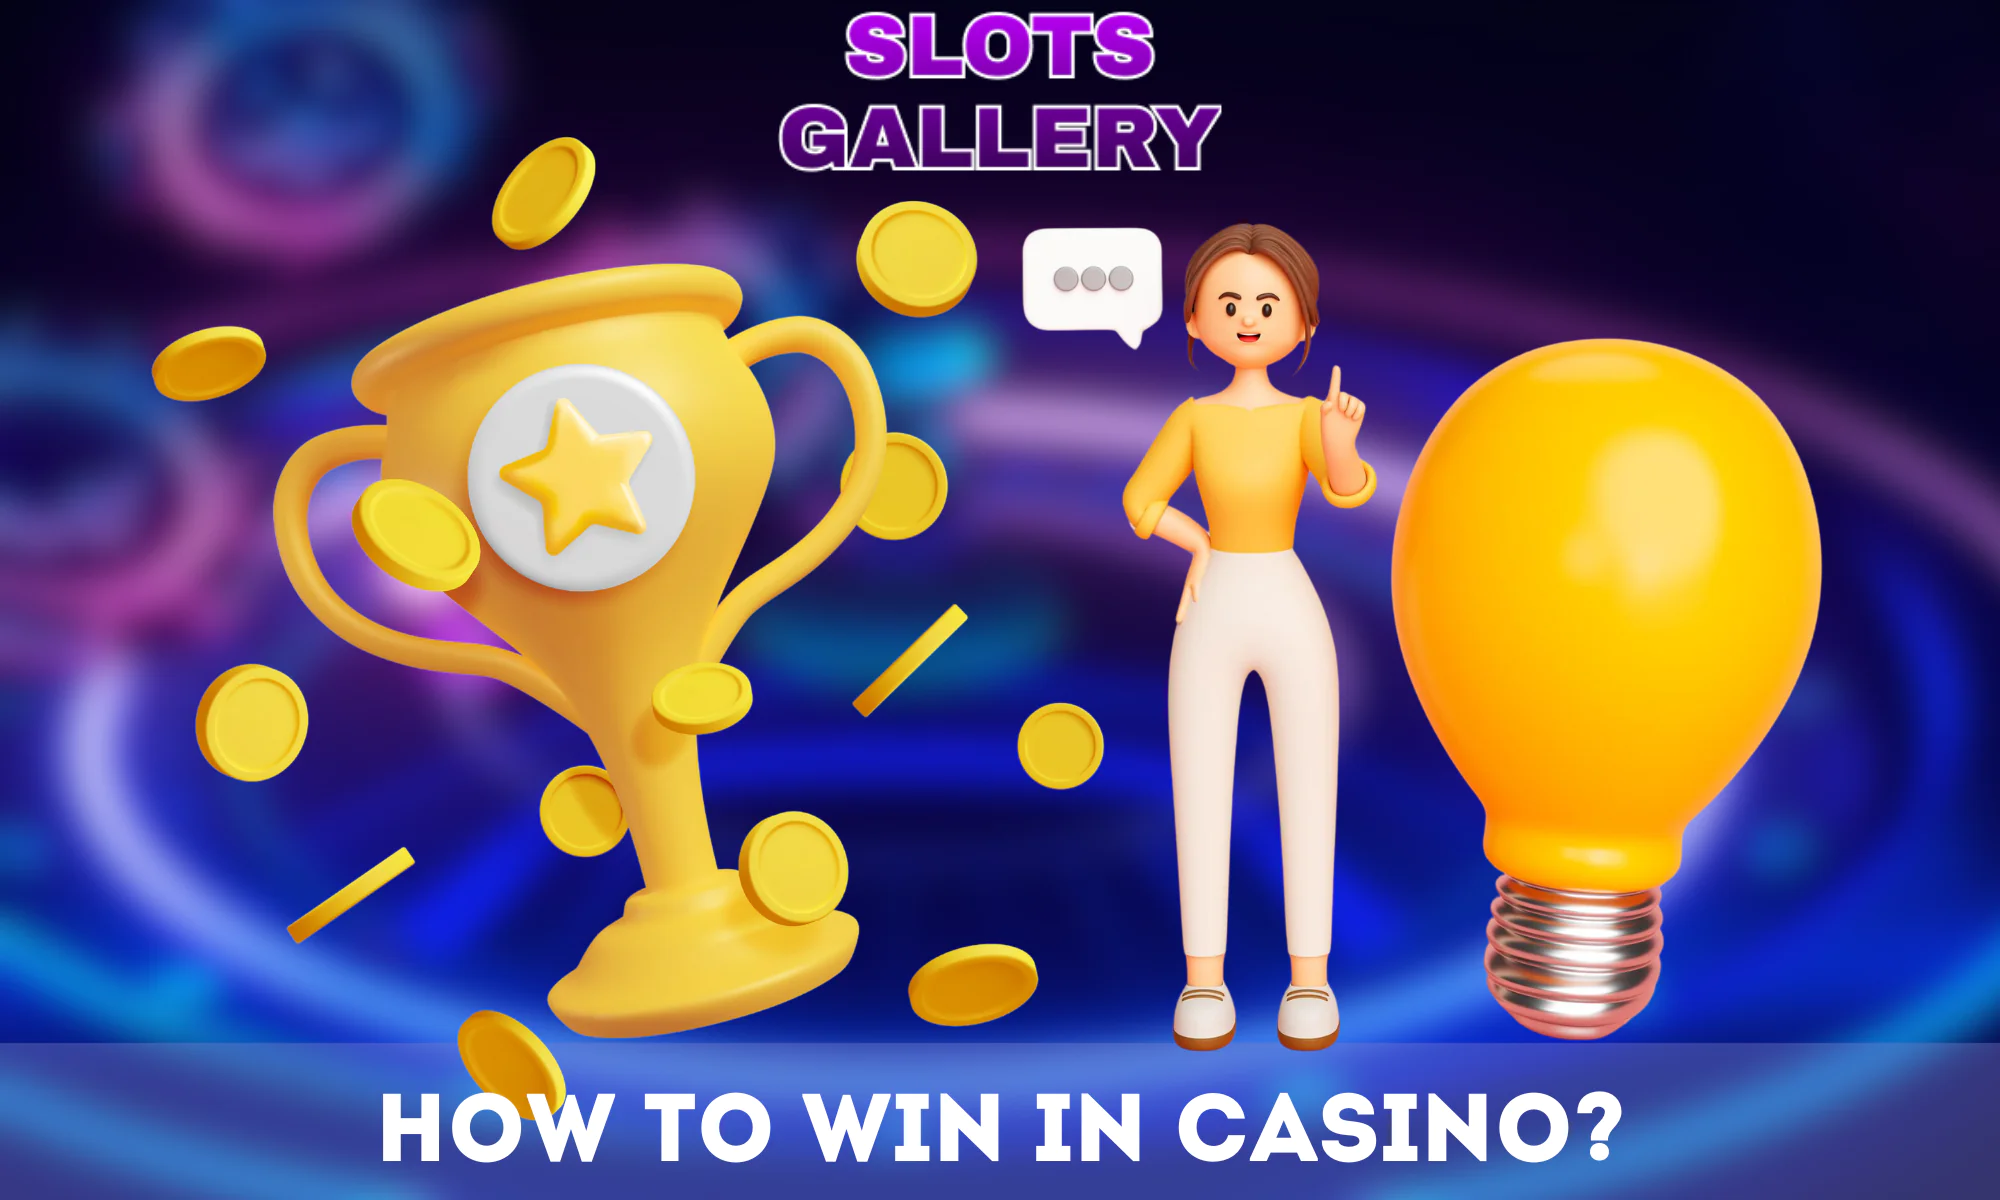 A few tips to make it easier to win at Slots Gallery